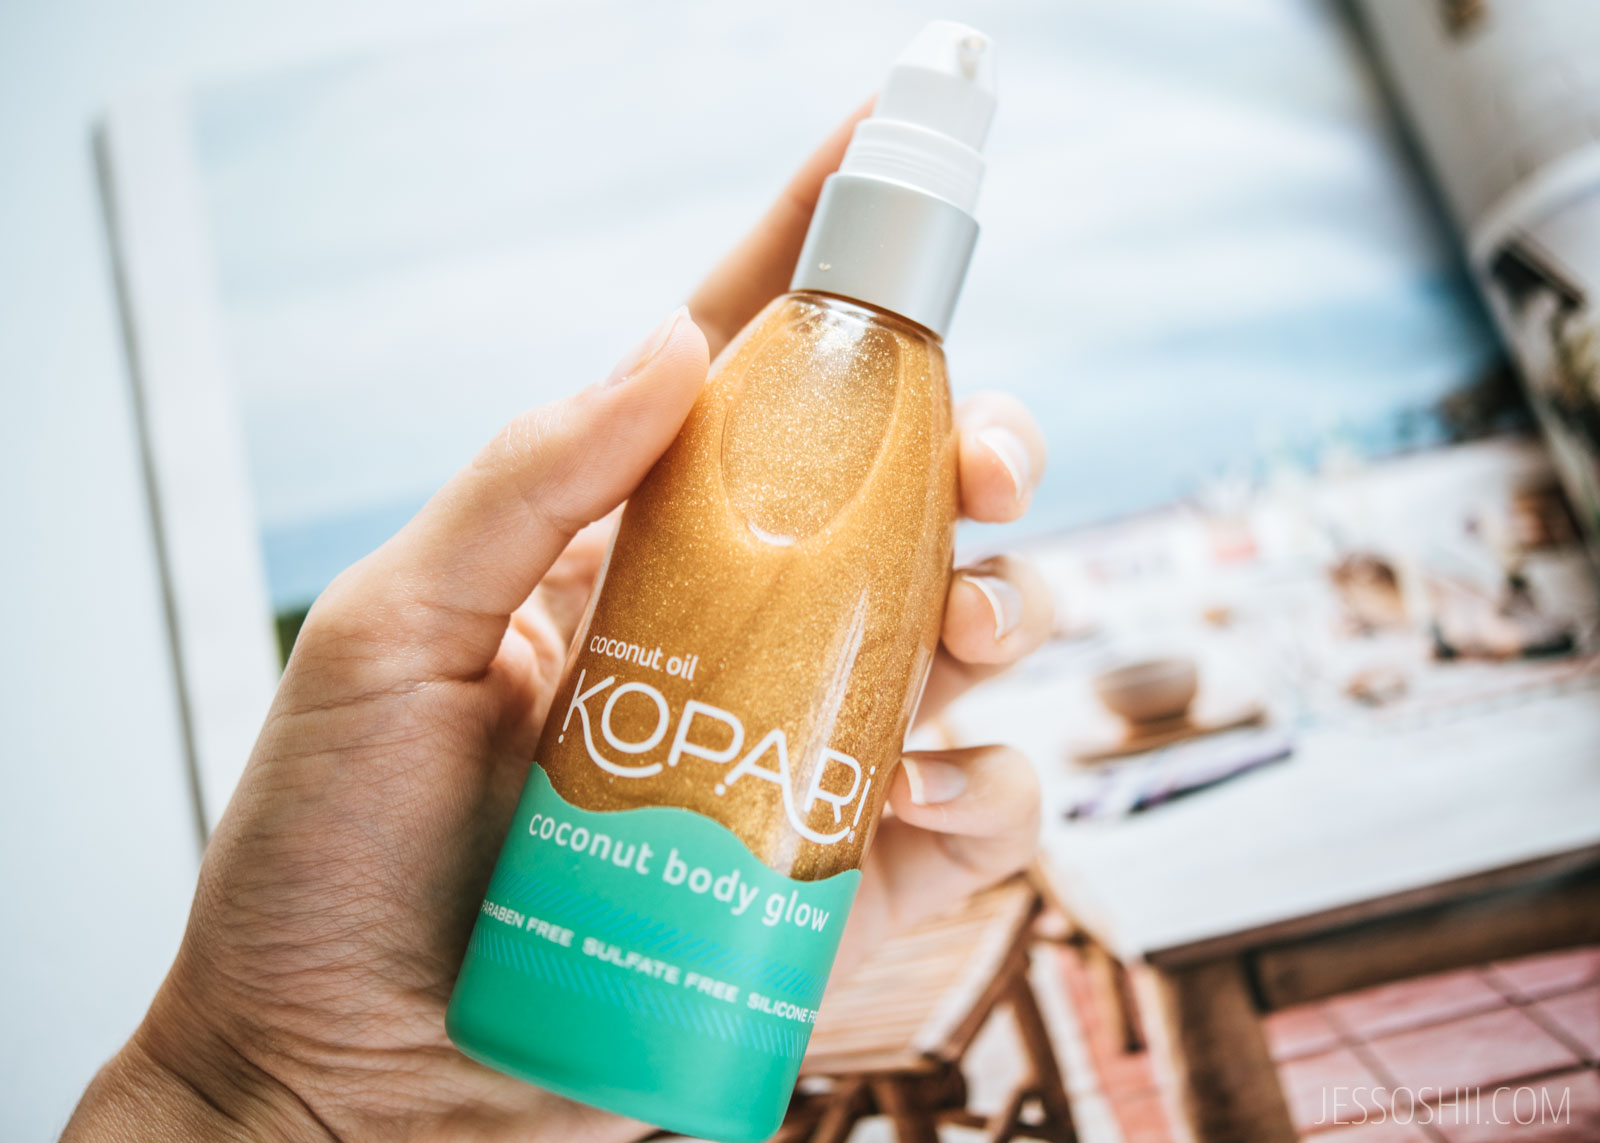 REVIEW | Kopari Coconut Body Glow | Swatches, Before & After - Jessoshii